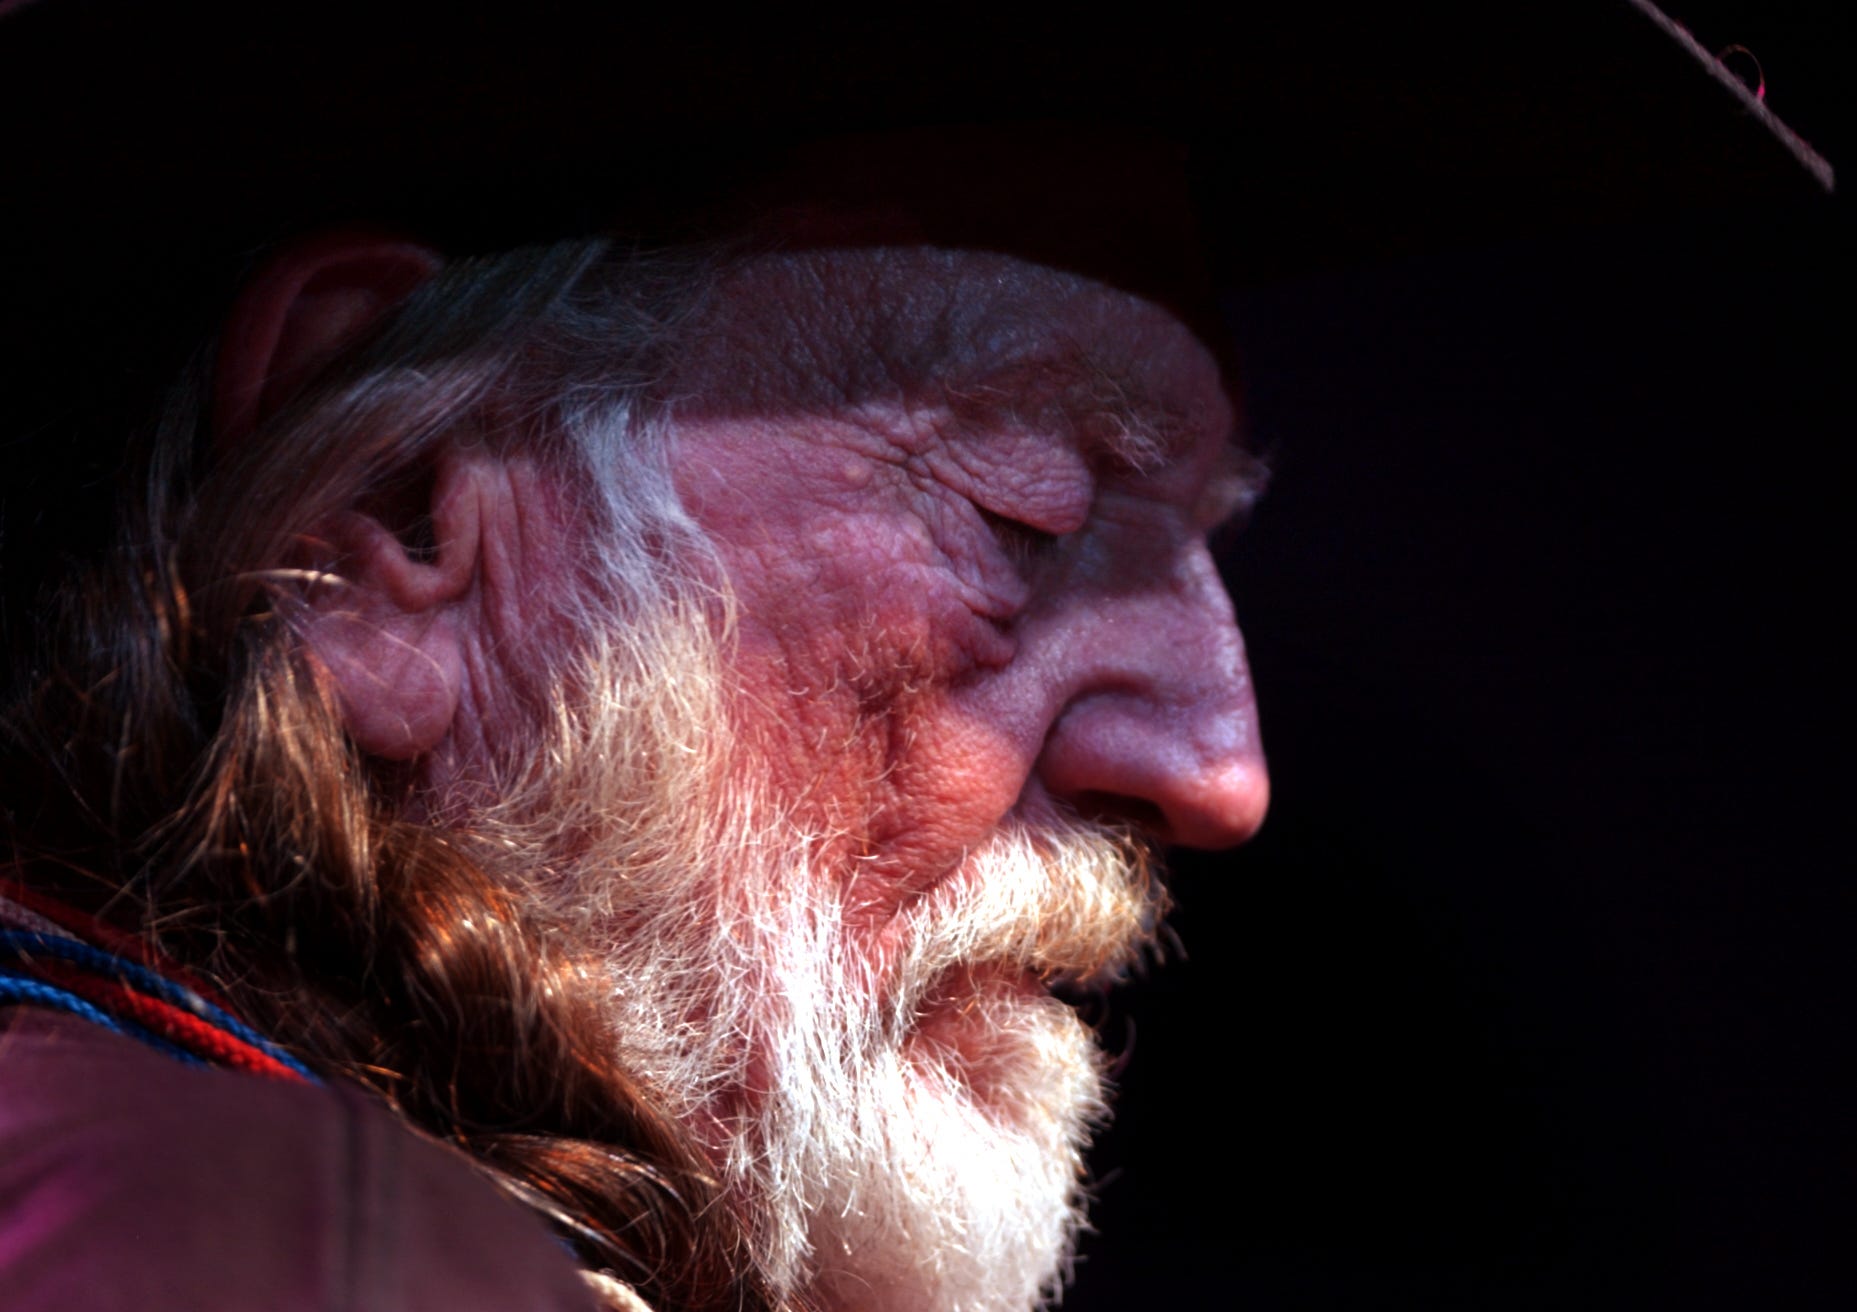 Willie Nelson performs at Willie Nelson's Tsunami Relief Concert at the Austin Music Hall on Sunday January 9, 2005.